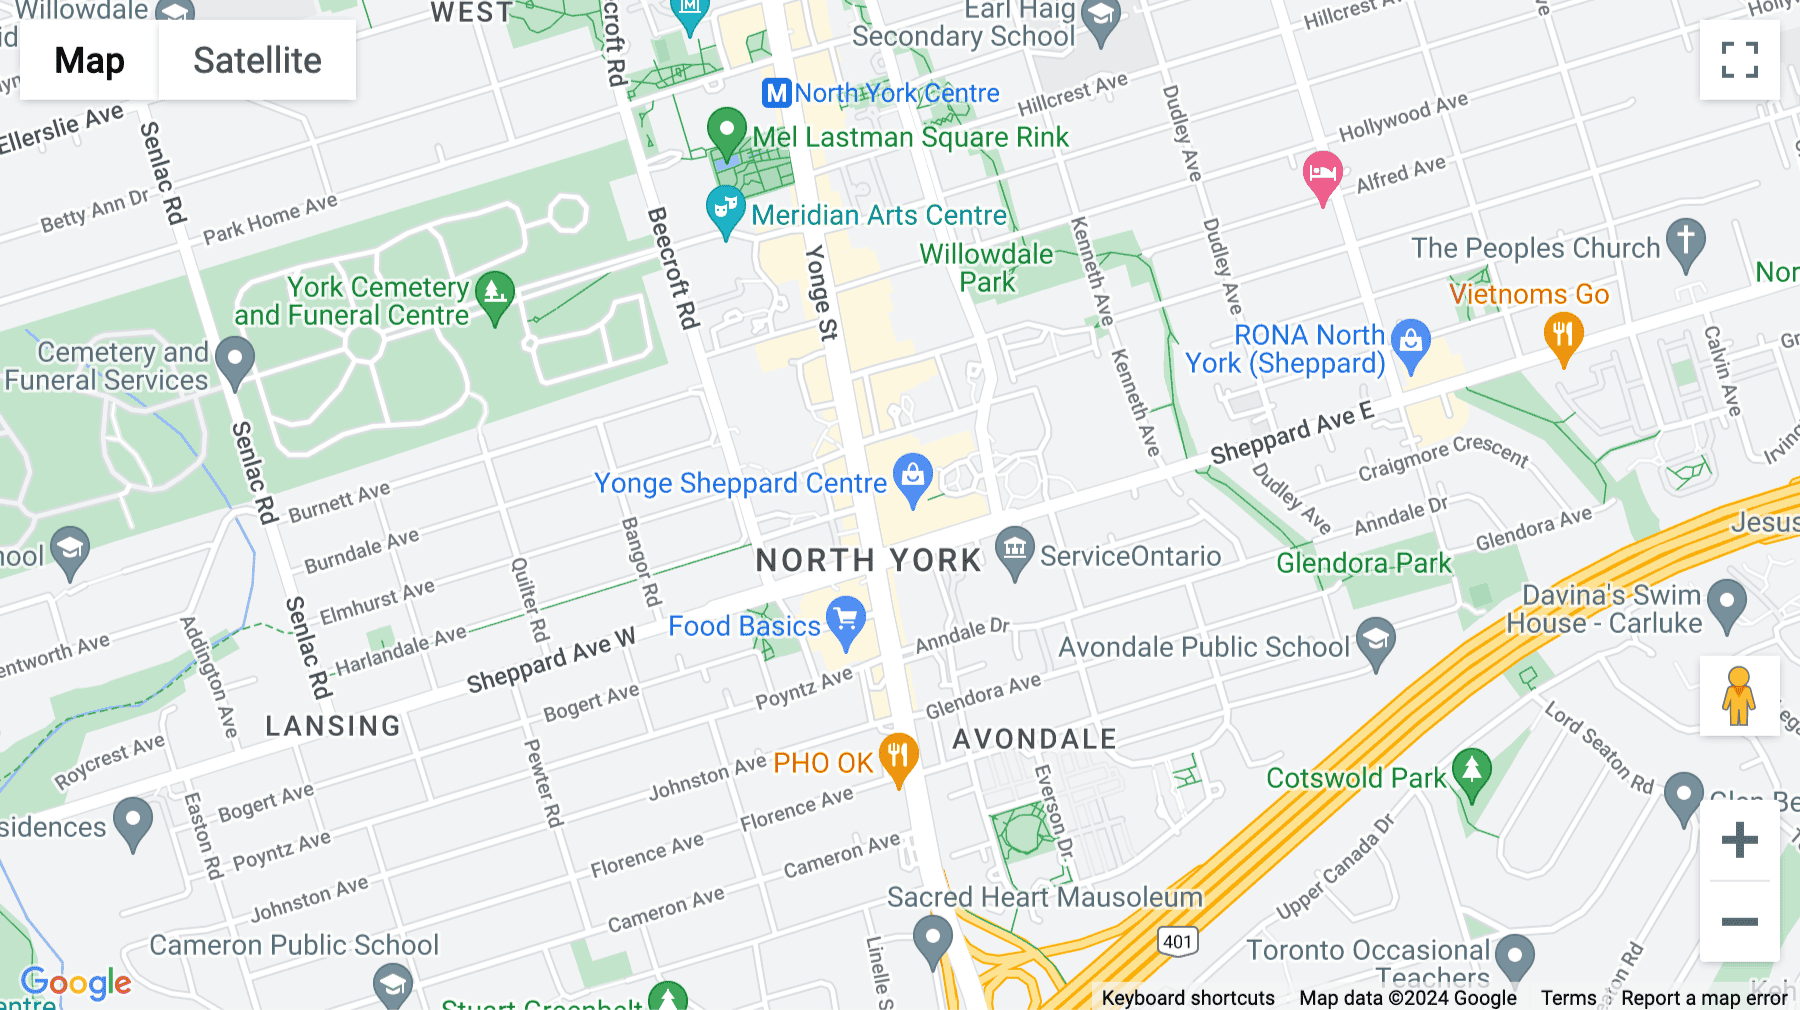 Click for interative map of 2 Sheppard Ave. E. 20th Floor, Toronto